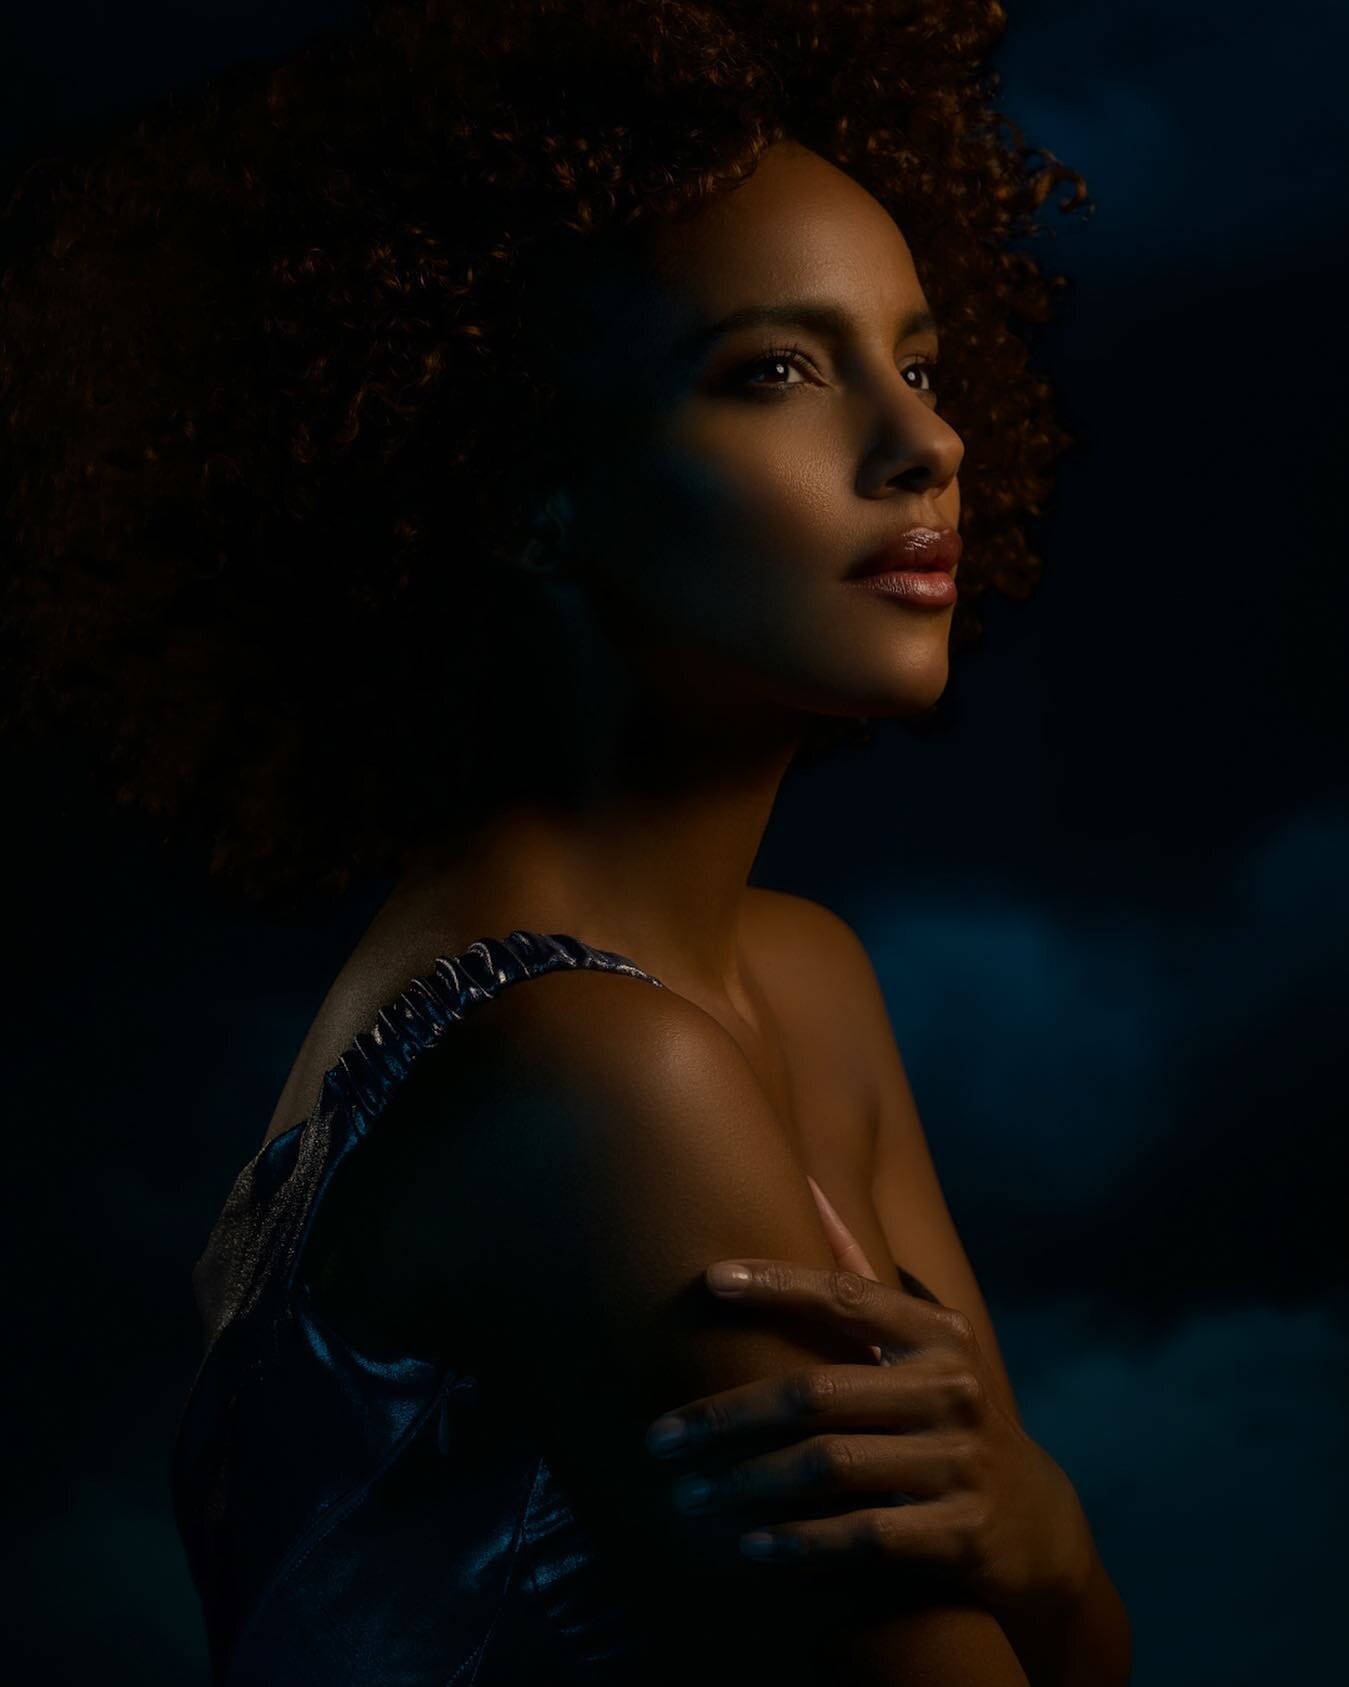 Dramatic? Cinematic? All of the above? Yes! 

It was great meeting and shooting with Nianga recently at Lindsay Adler&rsquo;s photography workshop!

In frame: @nianganiang 
Concept: @lindsayadler_photo
Stylist: @thecannonmediagroup 
Hair: @linhhair 
